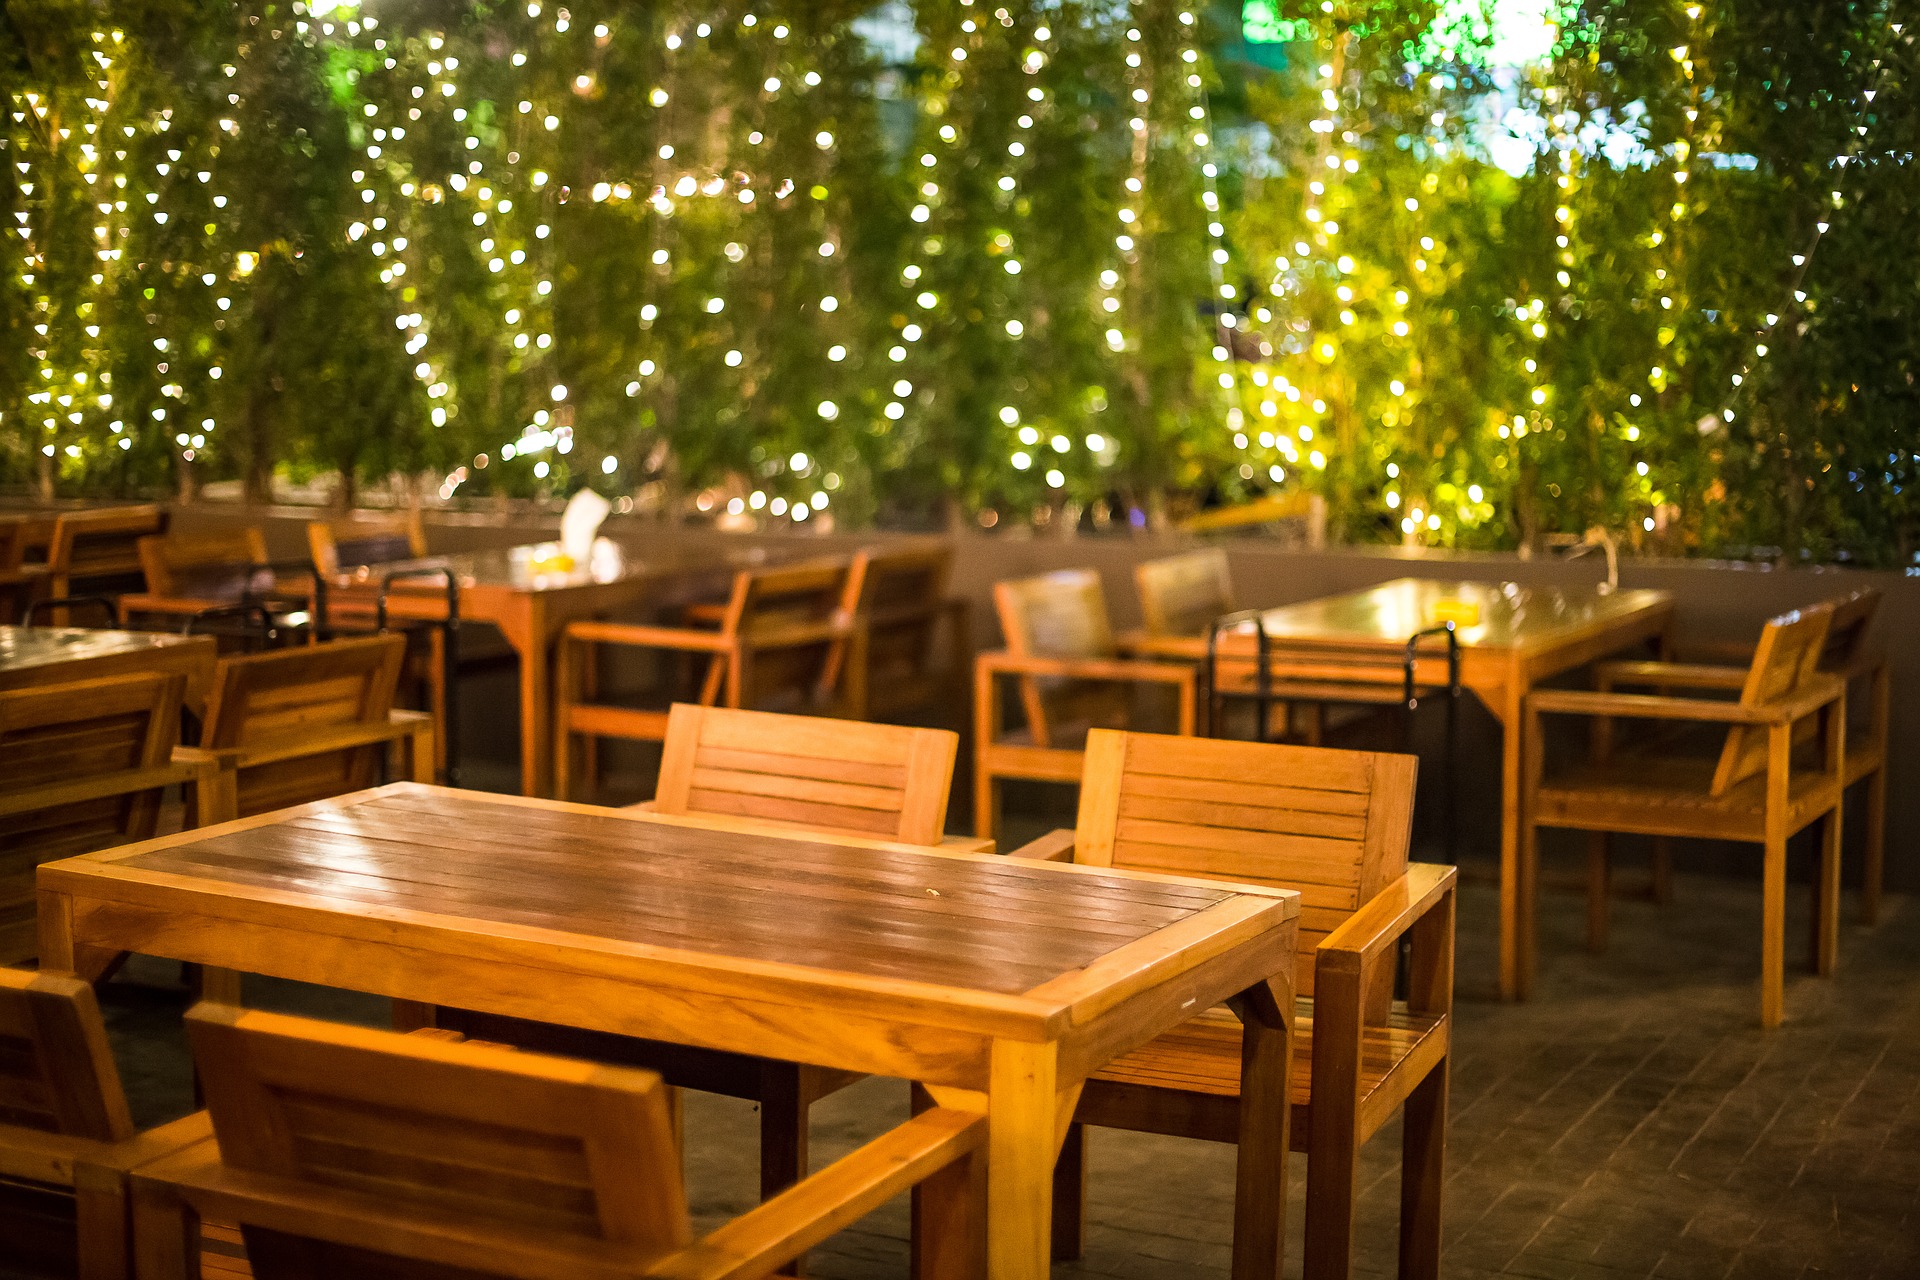 Mosquito Joe offers outdoor pest control services for businesses such as restaurants with outdoor areas. This allows customers to enjoy their meal without becoming the meal!